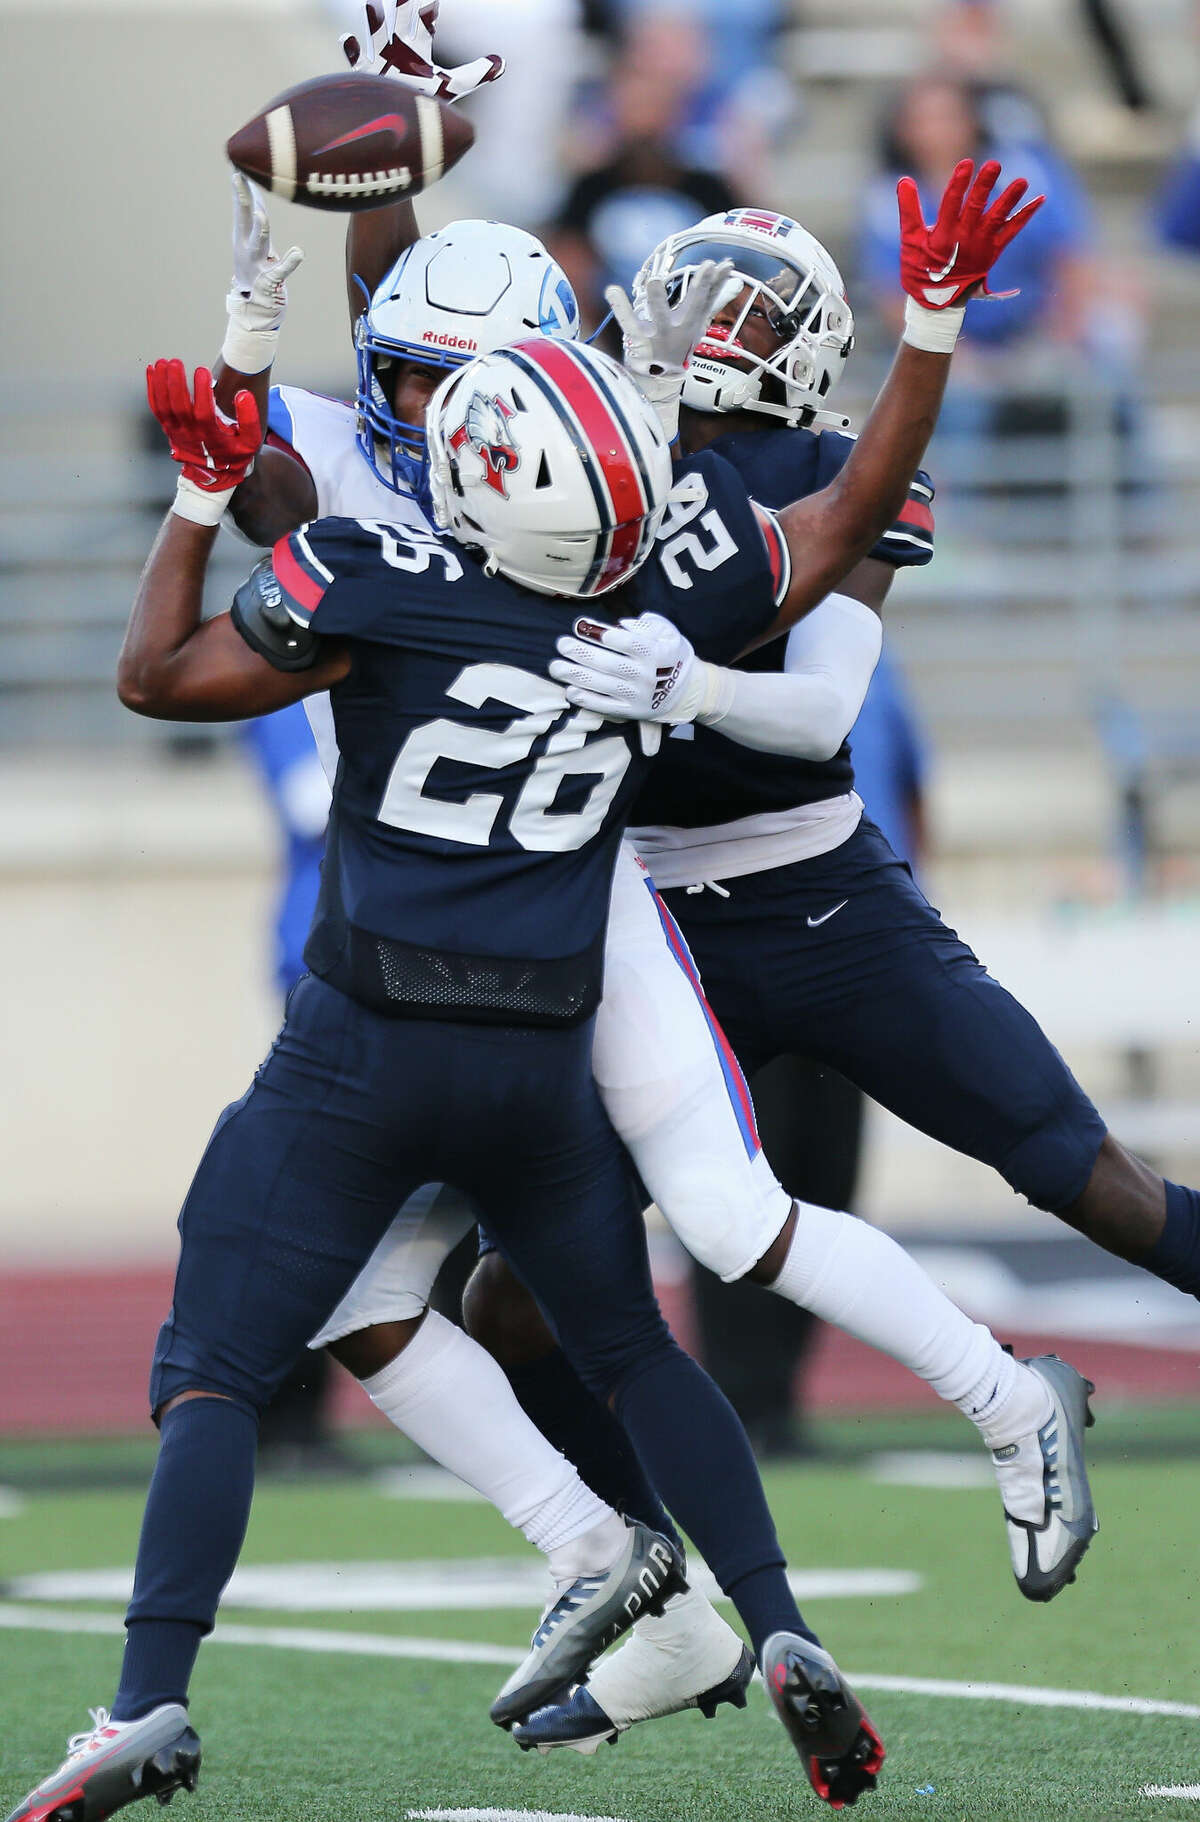 Atascocita players Chace Willis (26) and Braylon Conley (4) team up to interrupt an intended pass to Dickinson wide receiver De'Rion Crooms during the first quarter of a non-district game Thursday, Aug. 25, 2022, at Turner Stadium in Humble.